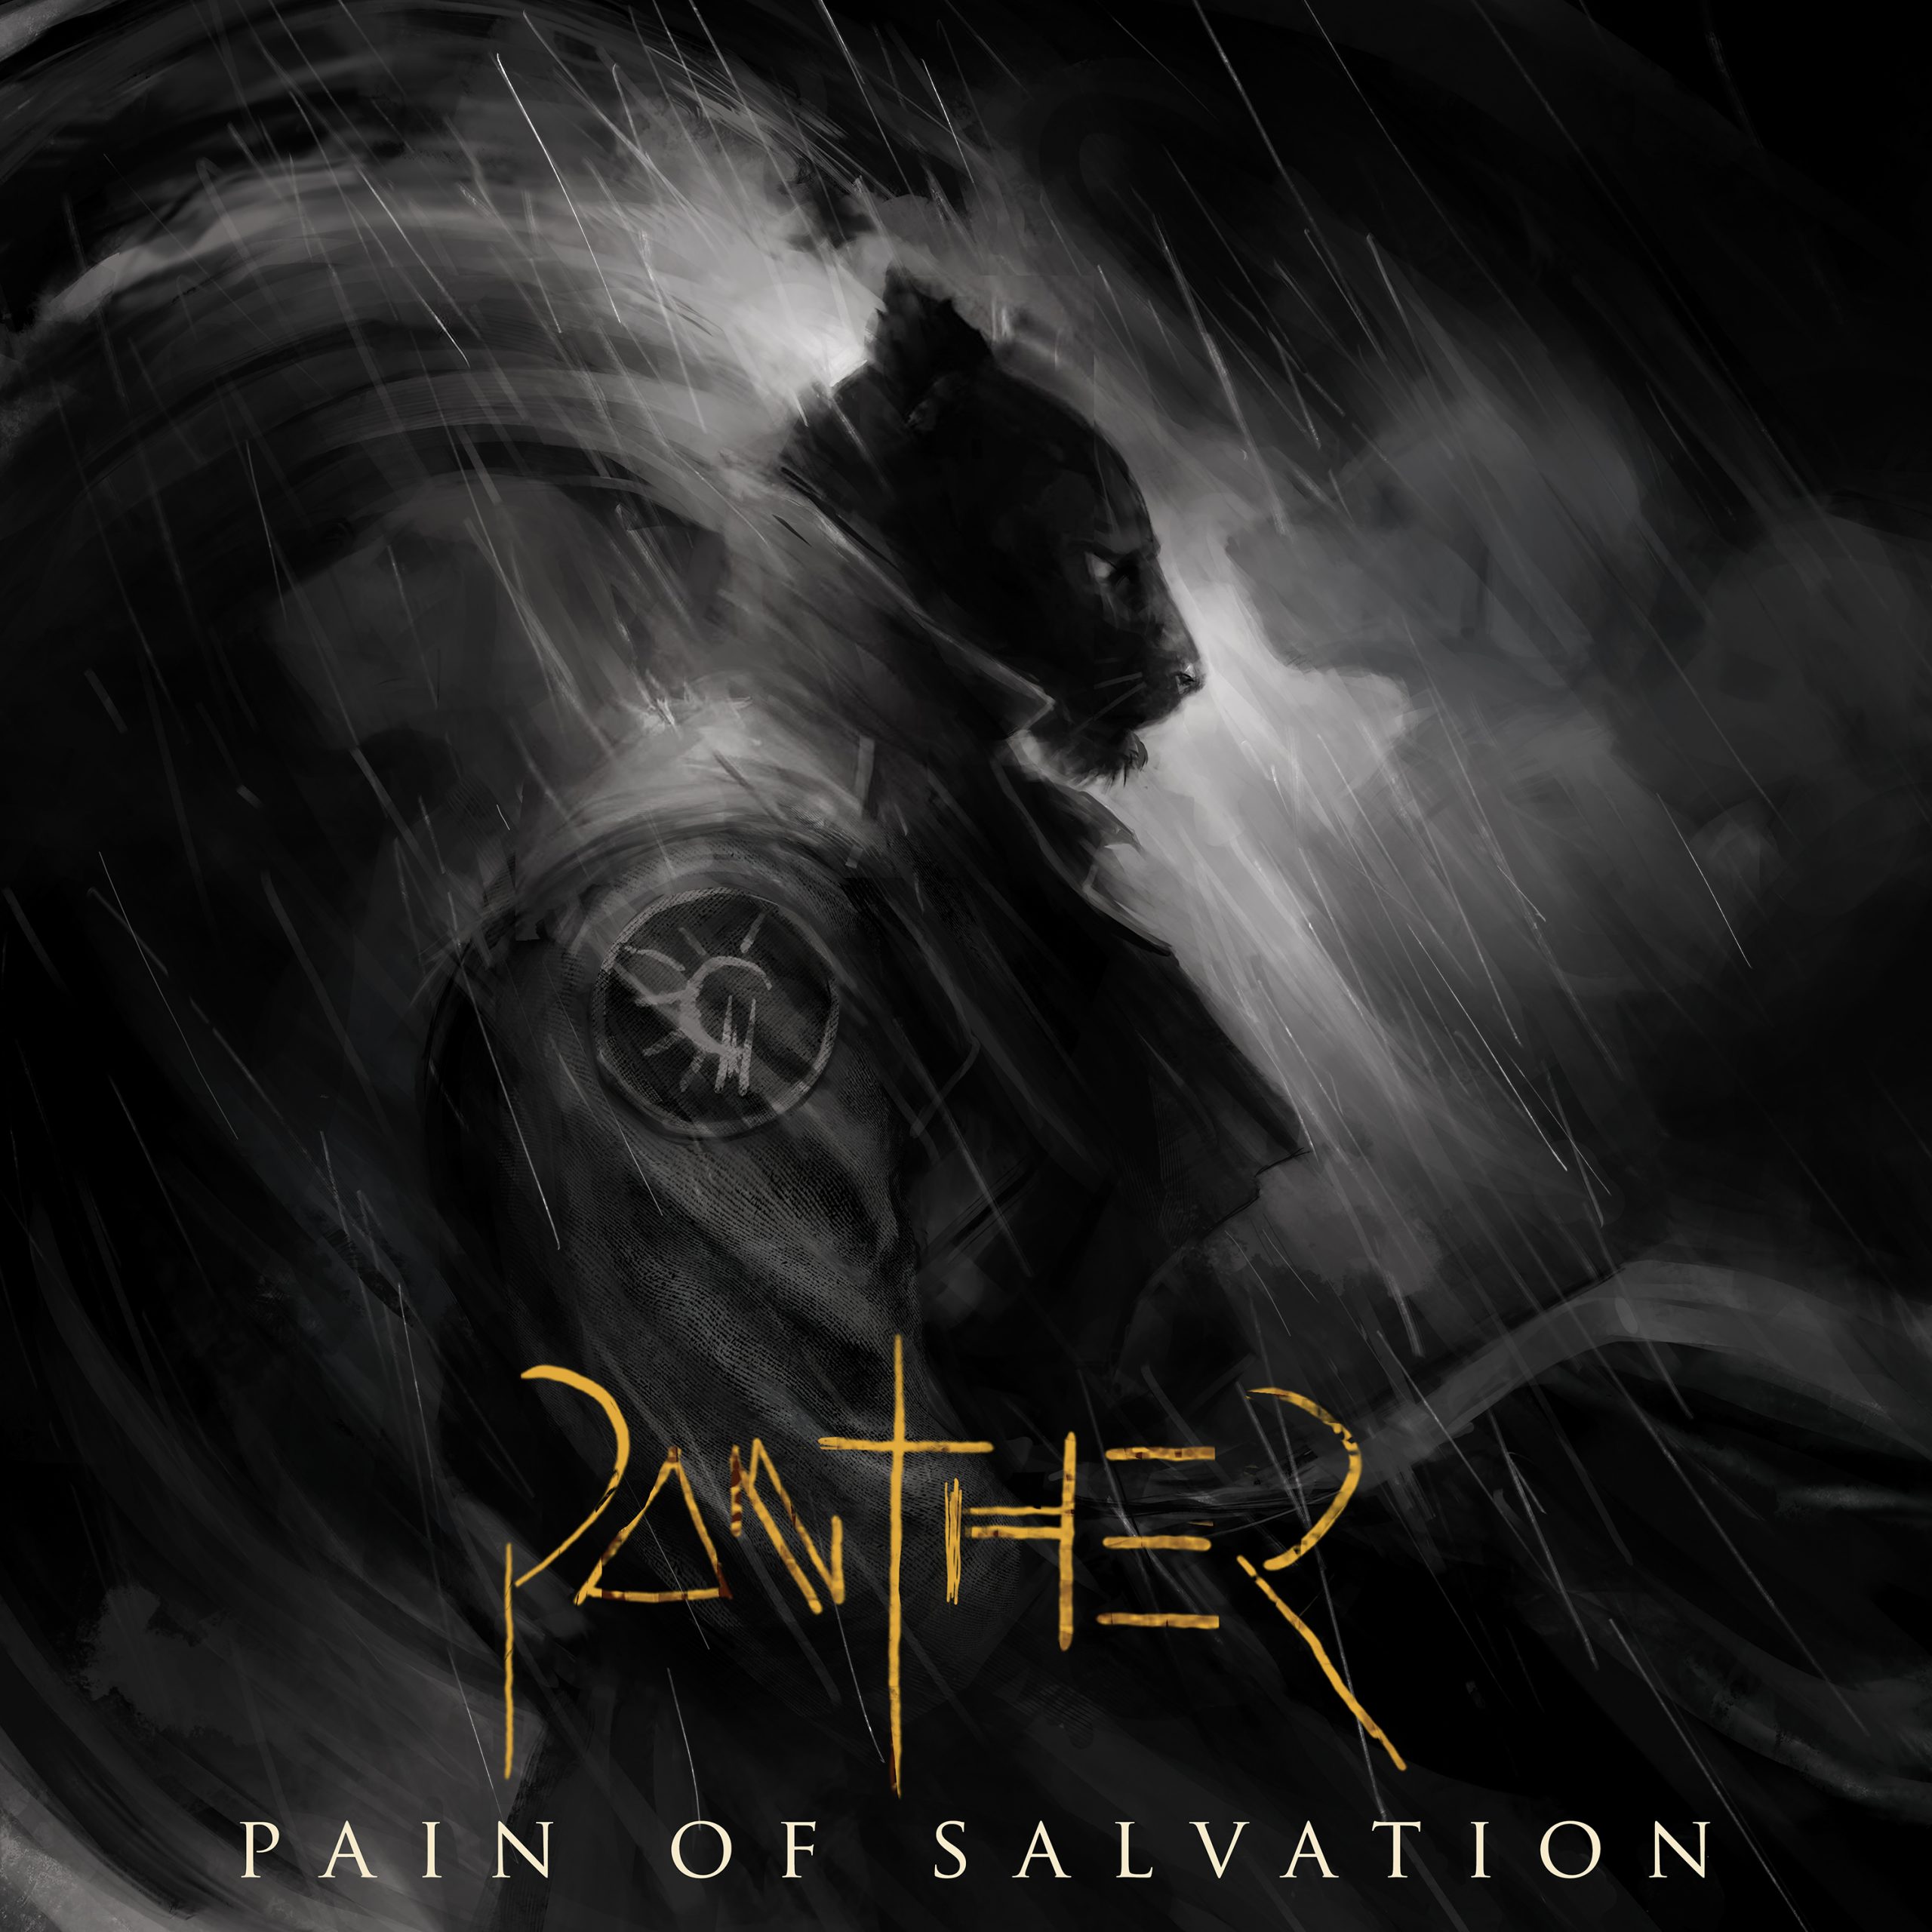 Pain Of Salvation (S) – Panther